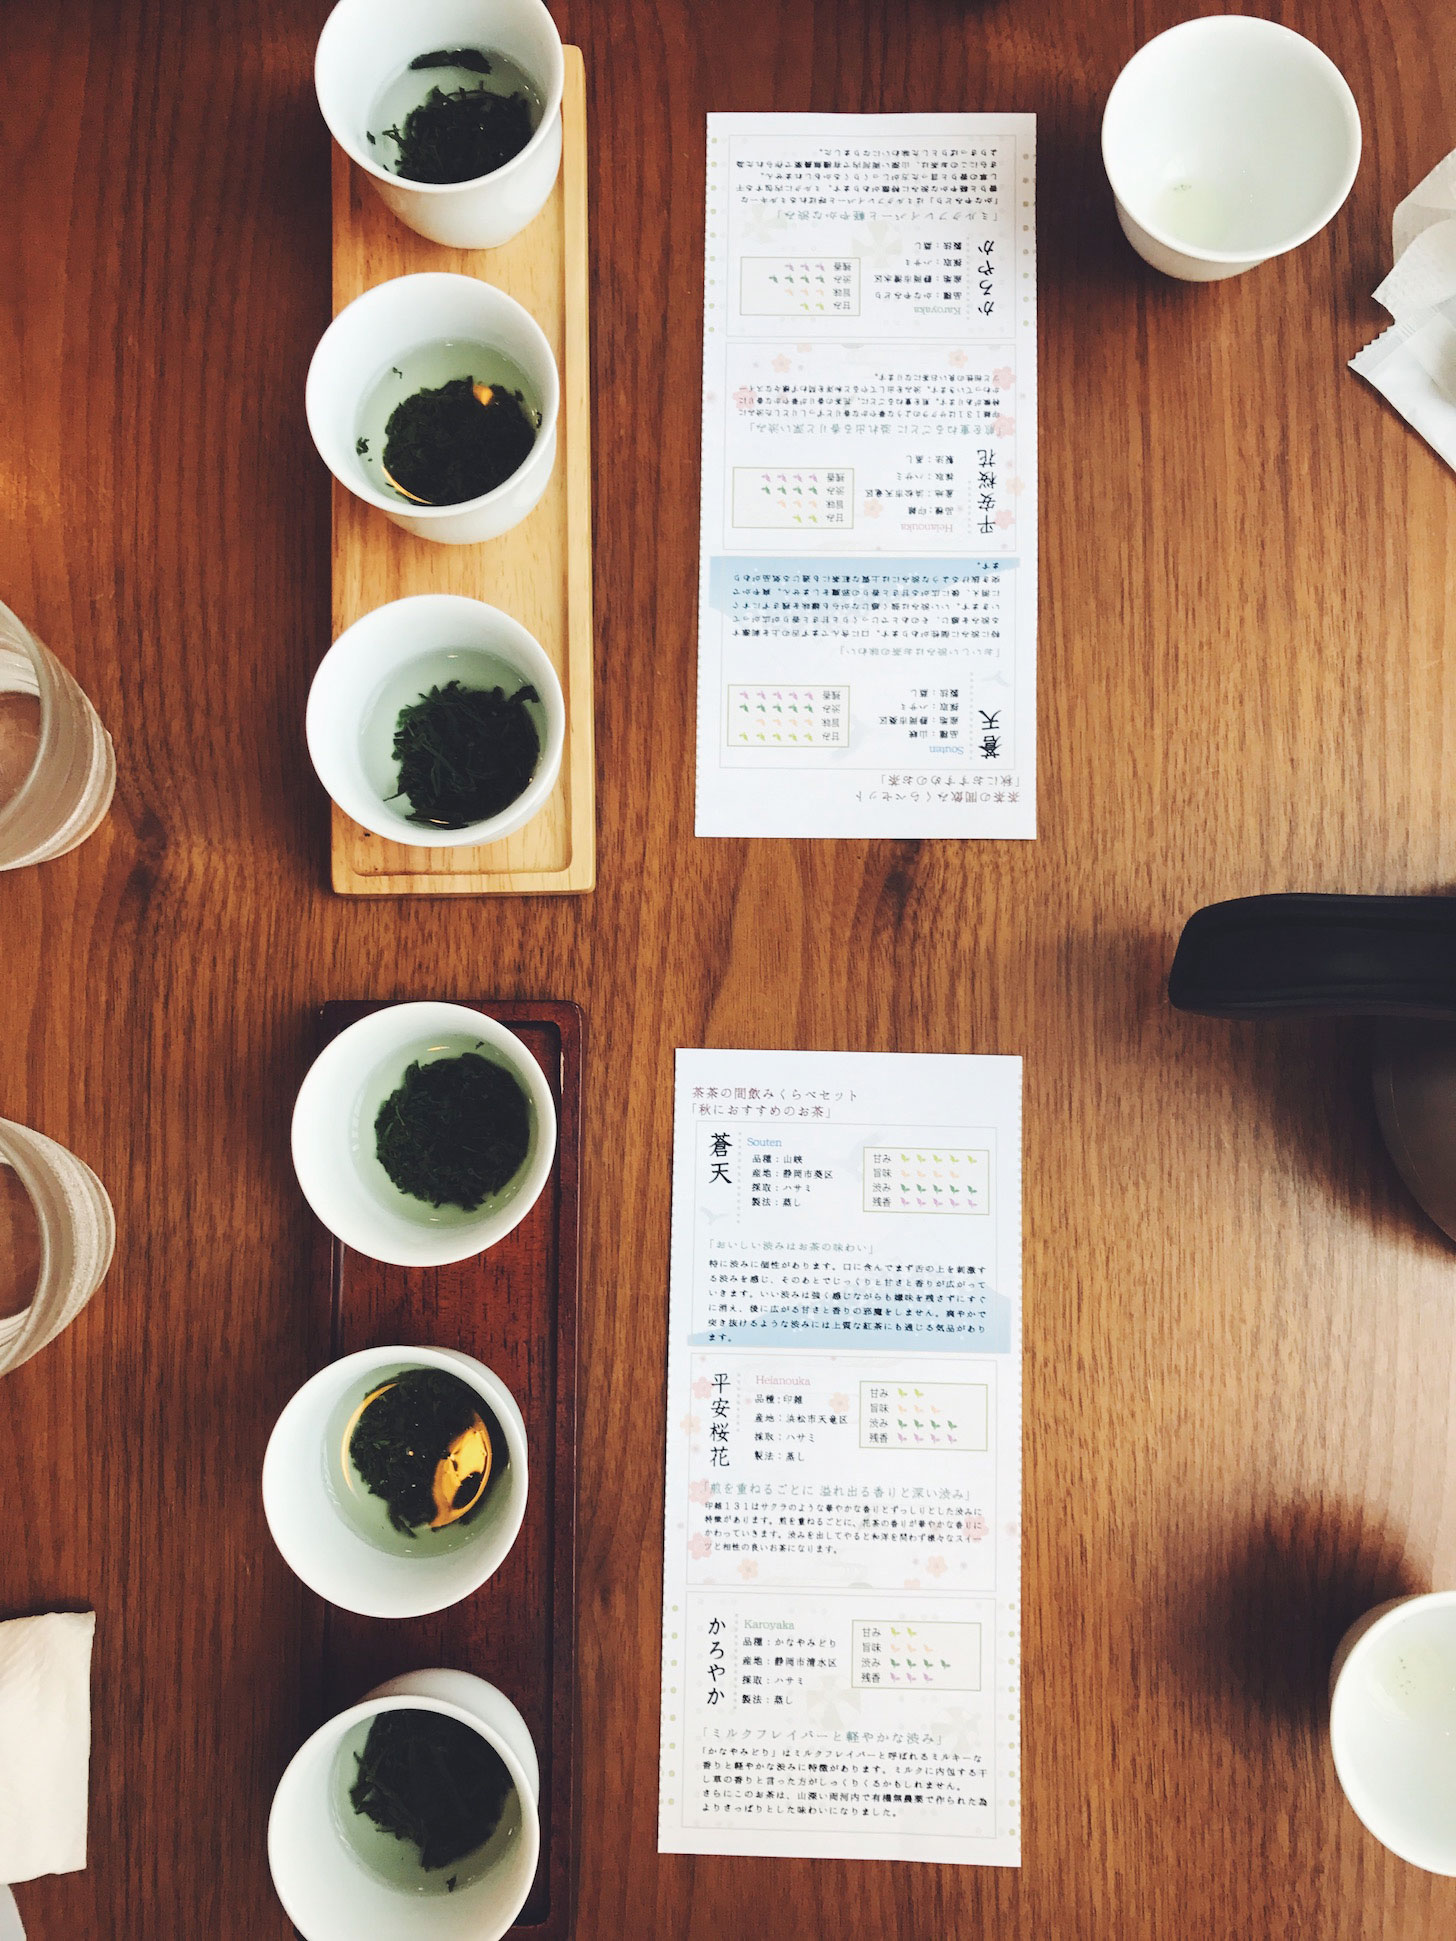 Different types of green tea at a tea shop in Tokyo